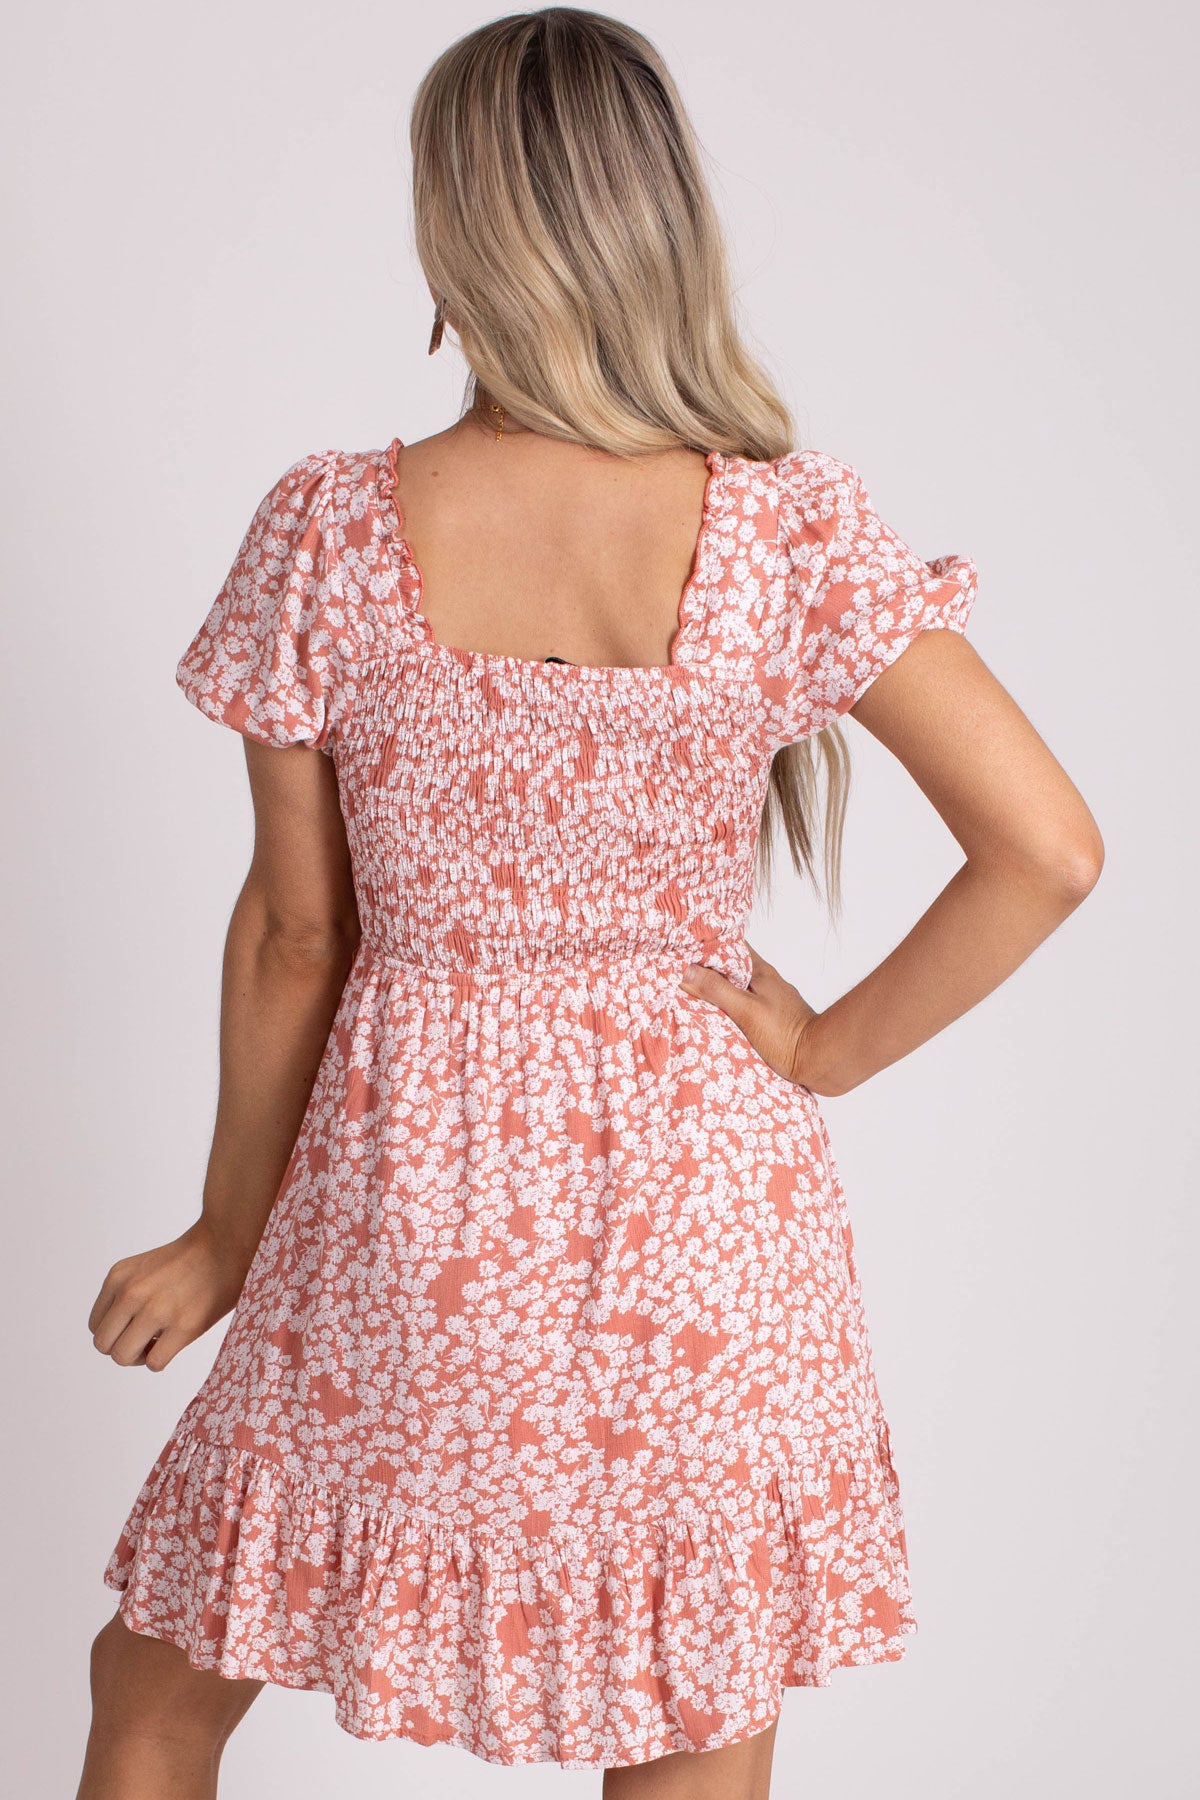 Women's Cute and Comfortable Boutique Dress